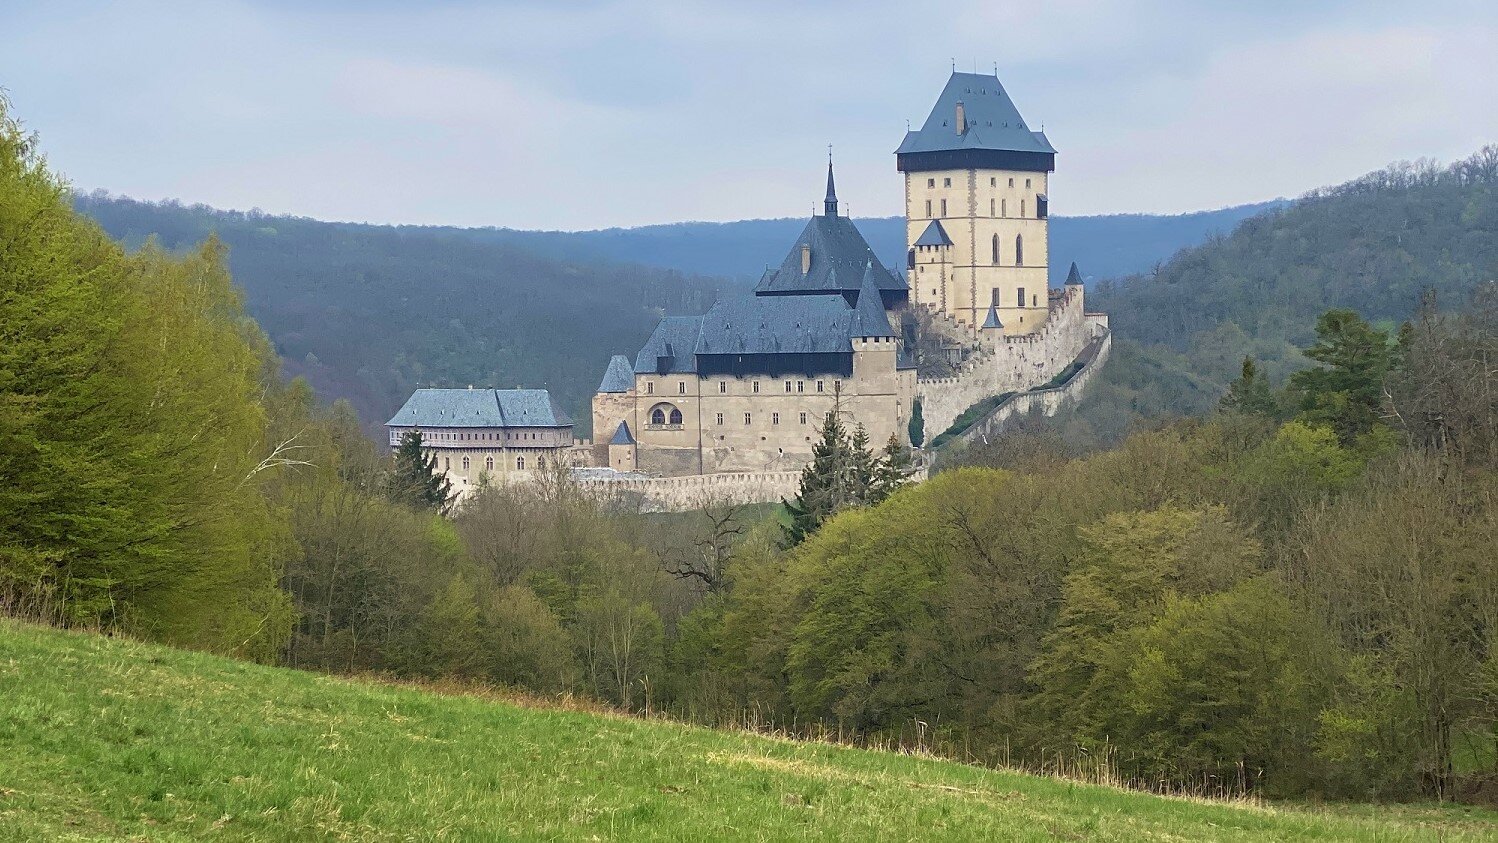 View of Karlstejn castle from a scenic viewpoint - part of this hike